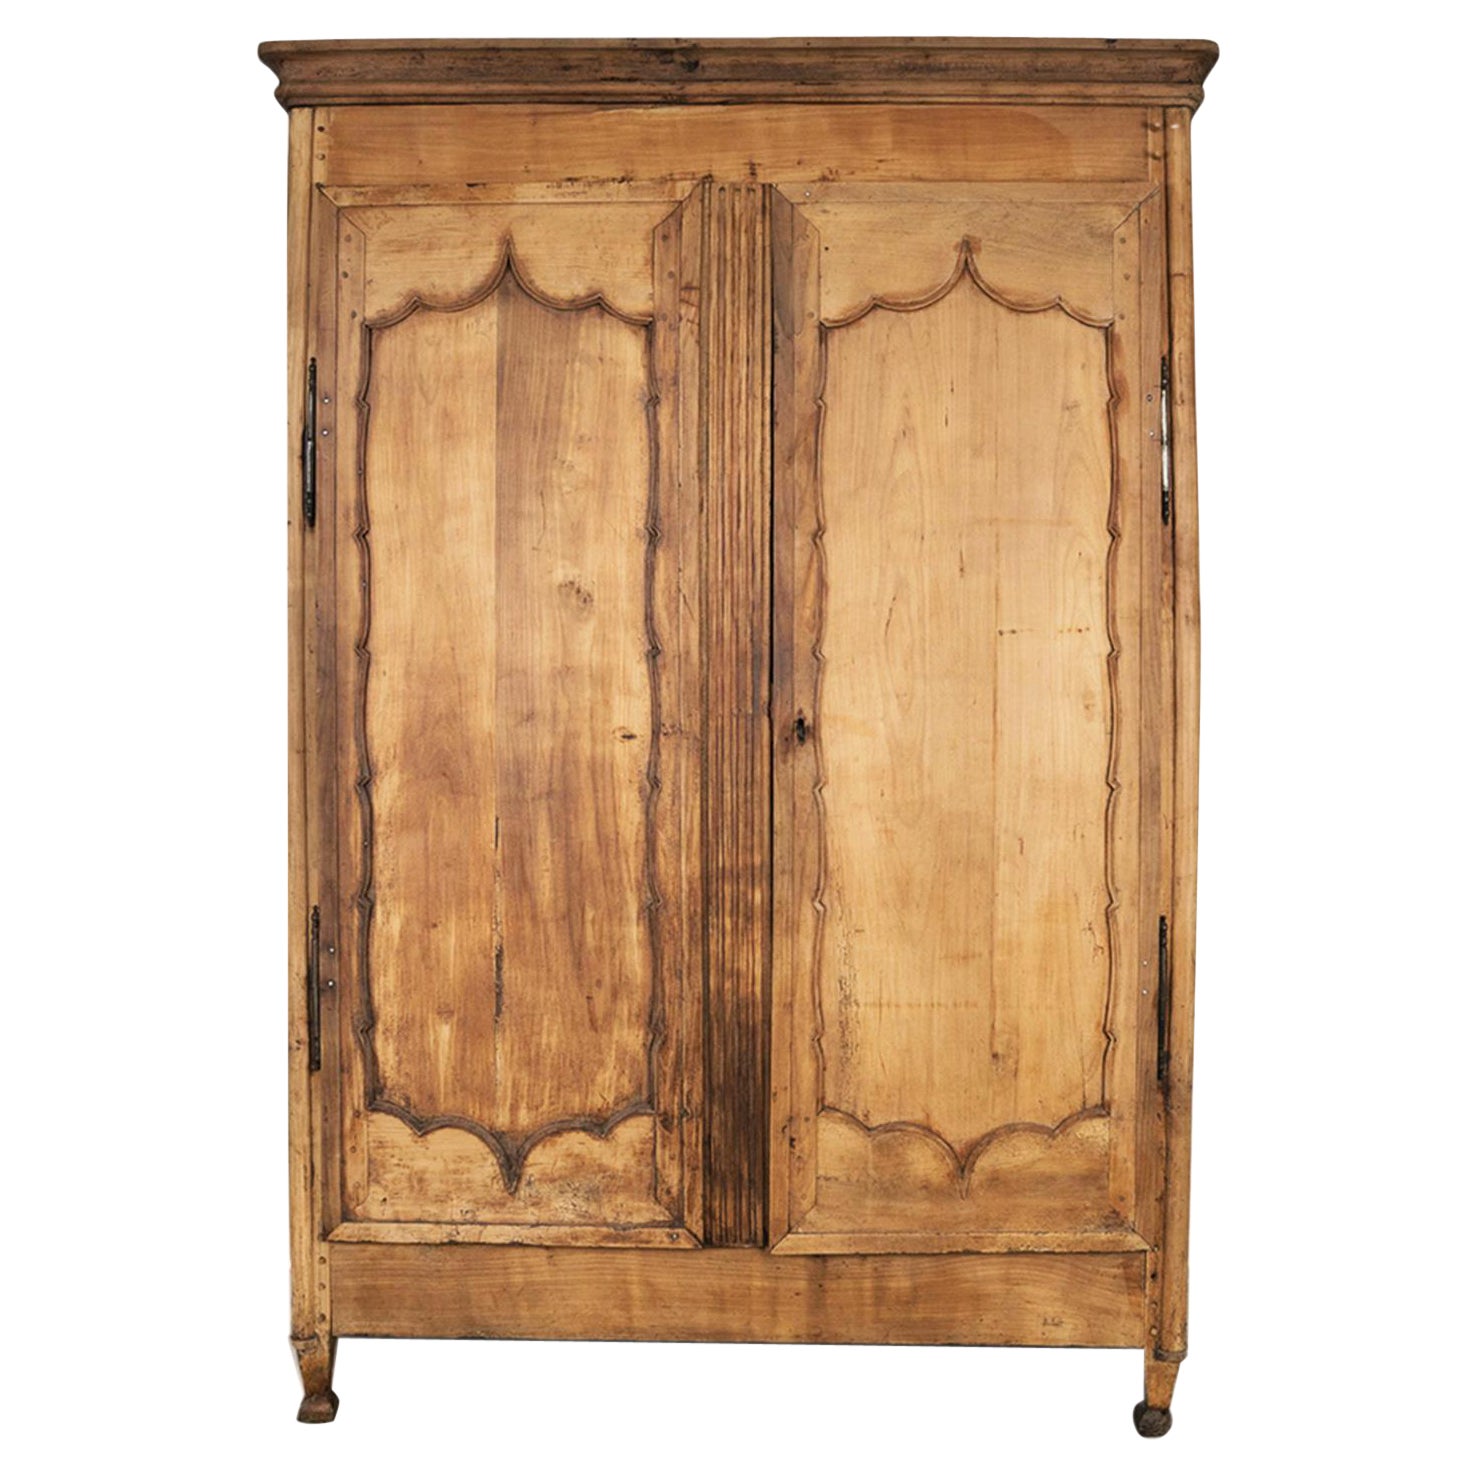 Antique French Rustic Country 19th C Hand Carved Fruitwood Armoire or Wardrobe